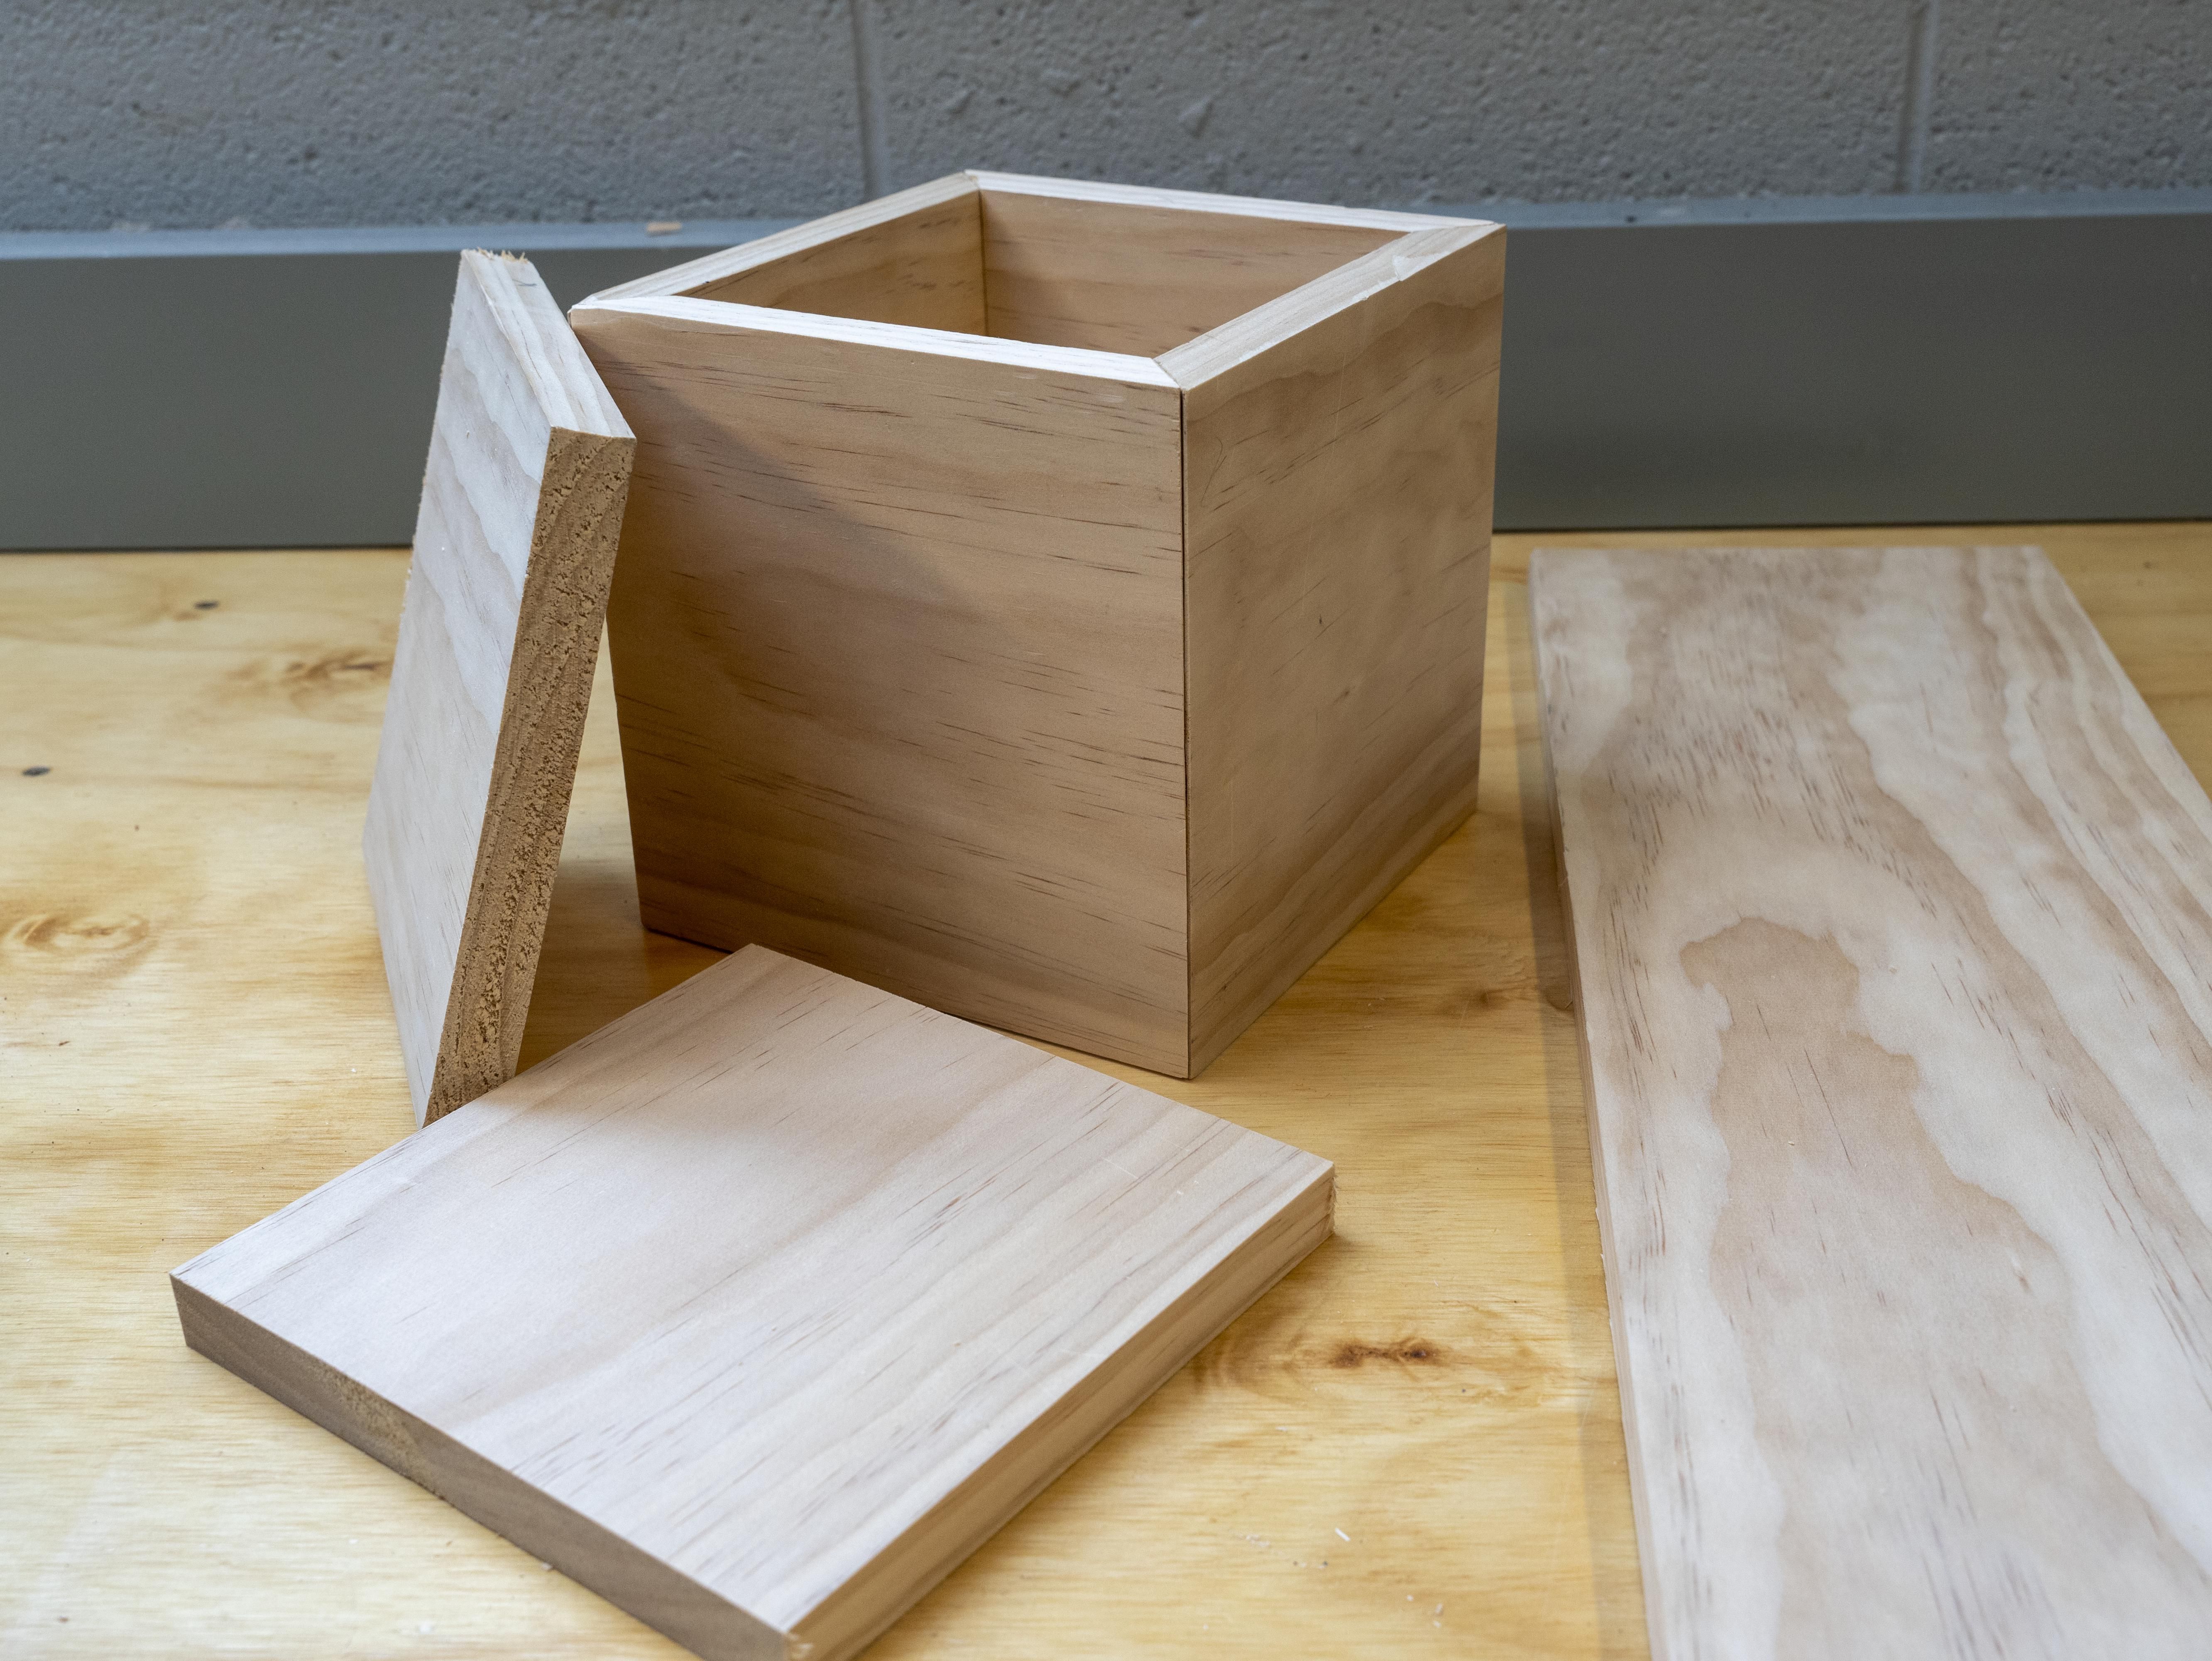 Learning Woodworking Through ChatGPT: A First-Person Experience